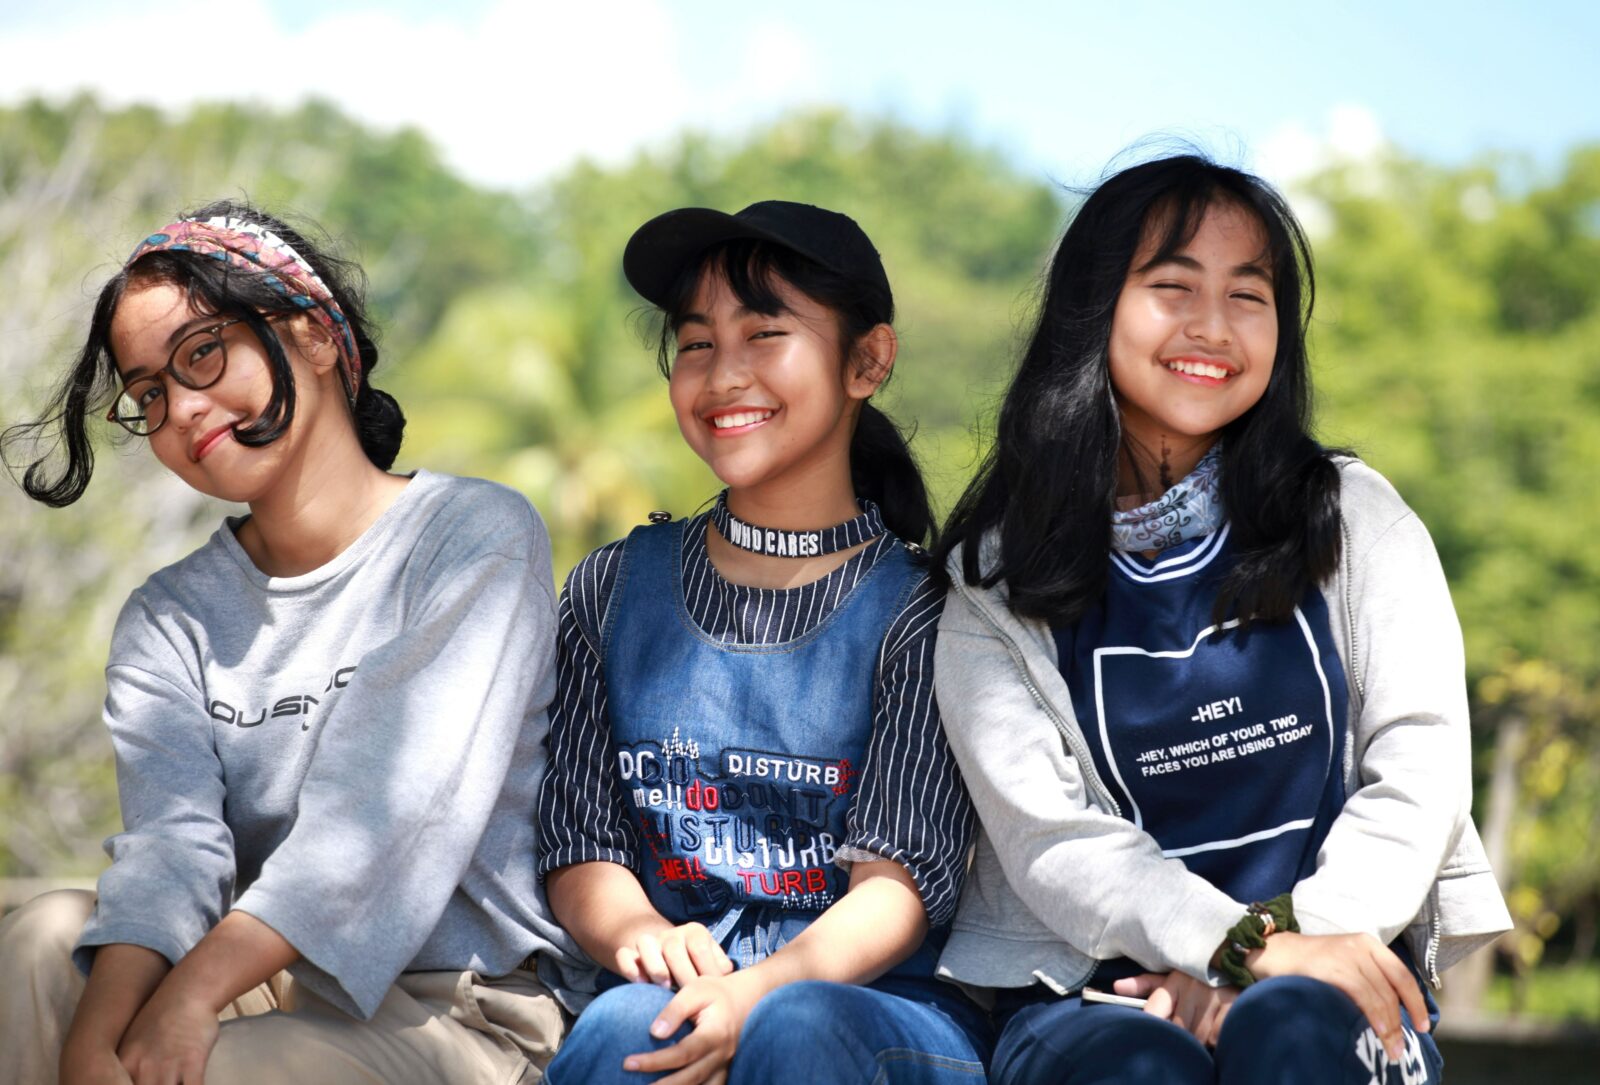 Three pre-teen girls sitting together smiling in a park